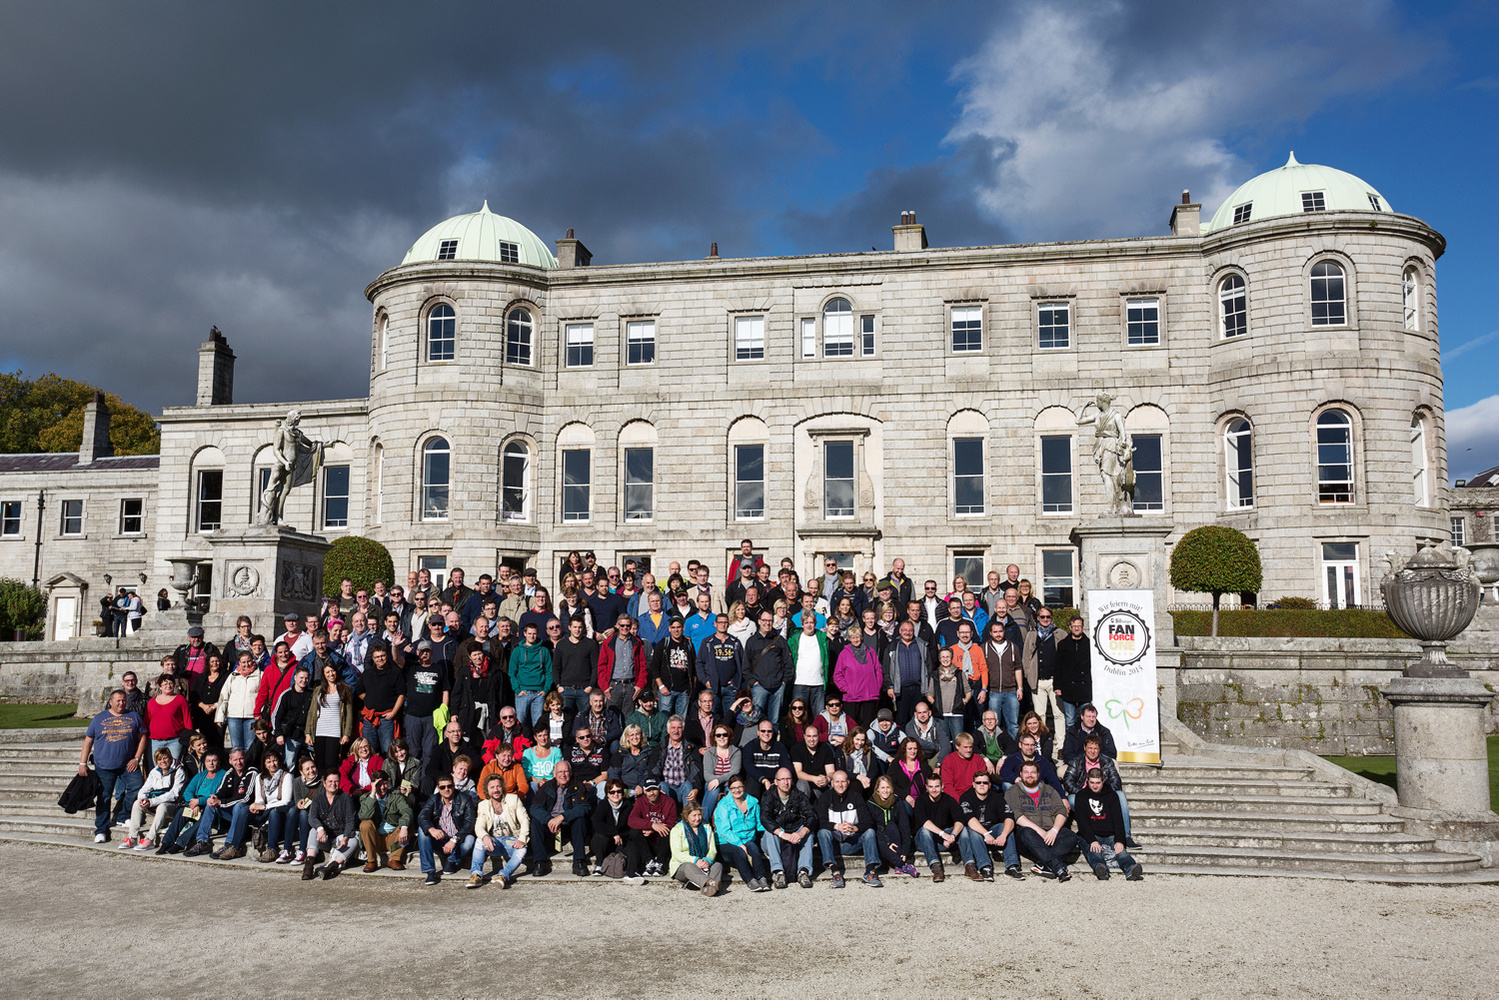 Large corporate group photo at Powerscourt House and Gardens, Co Wicklow. Professional event photography services Dublin